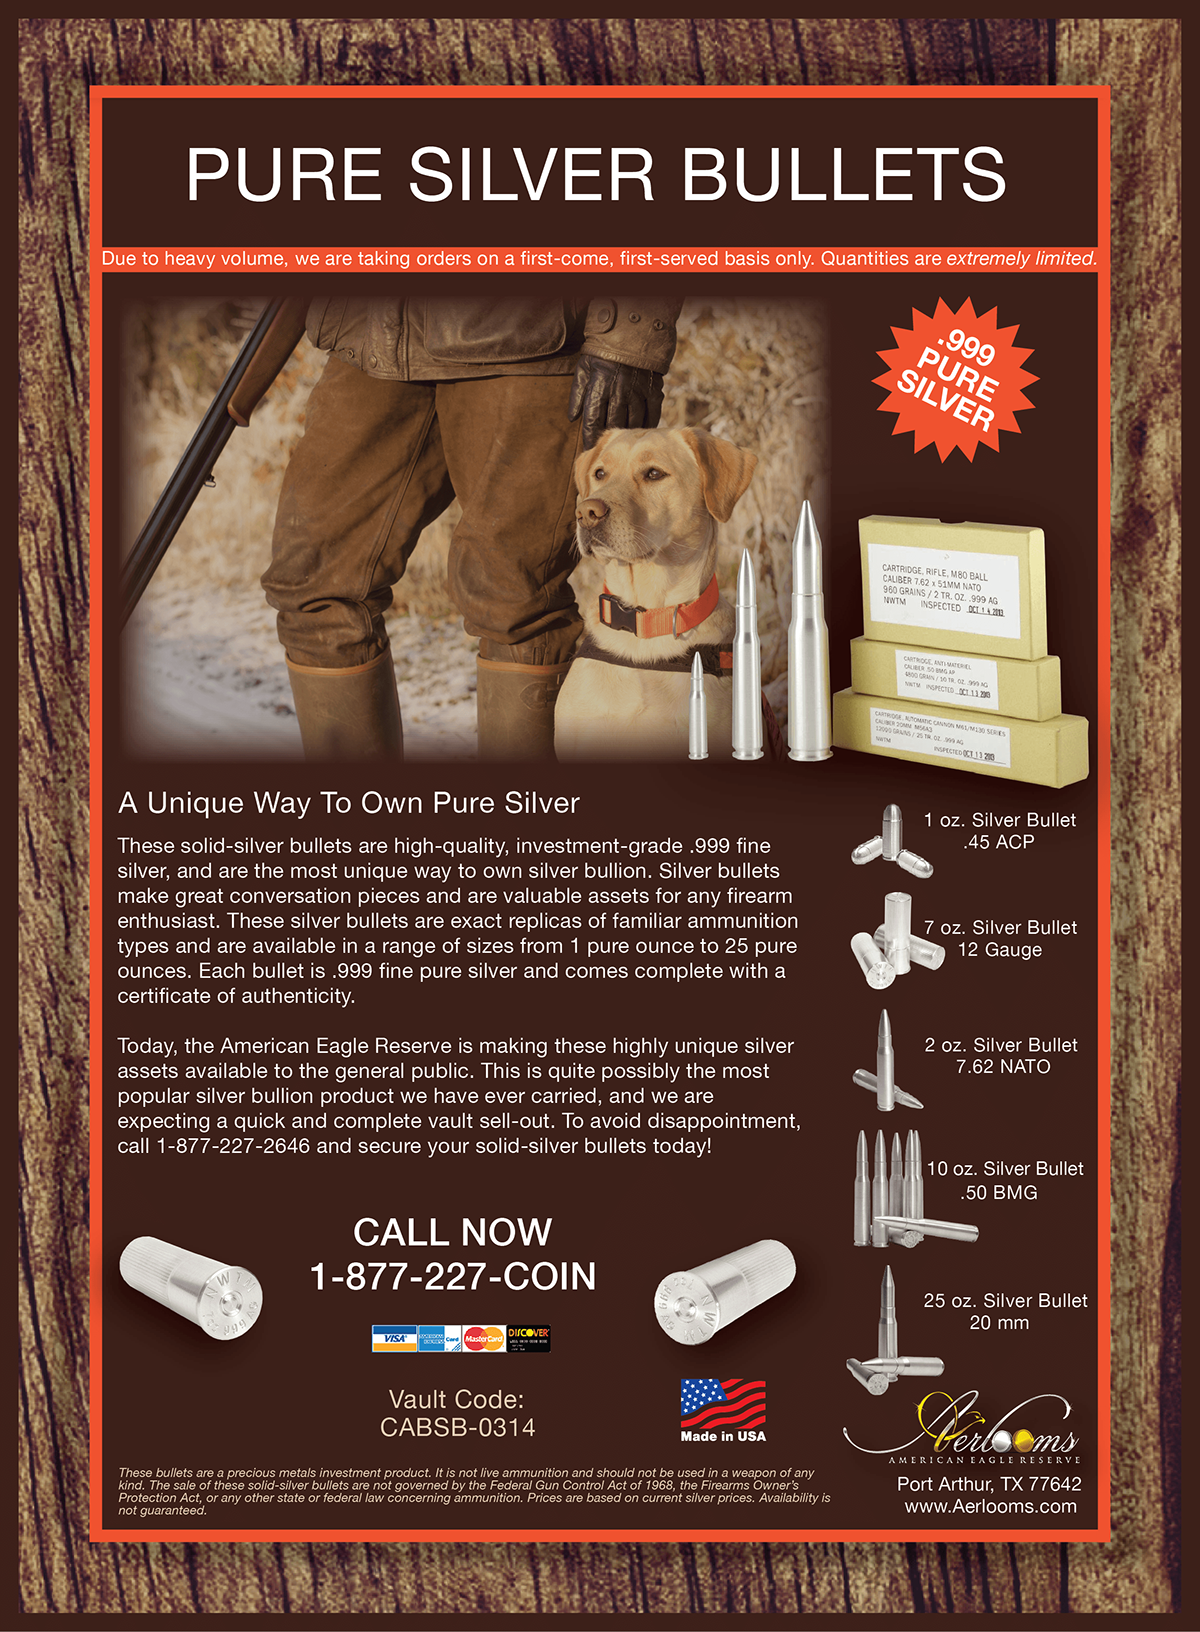 Aerlooms The American EagleReserve hunter Hunting silver silver bullets Bullion us mint duck lab dog man's best friend product advertisment cabela's